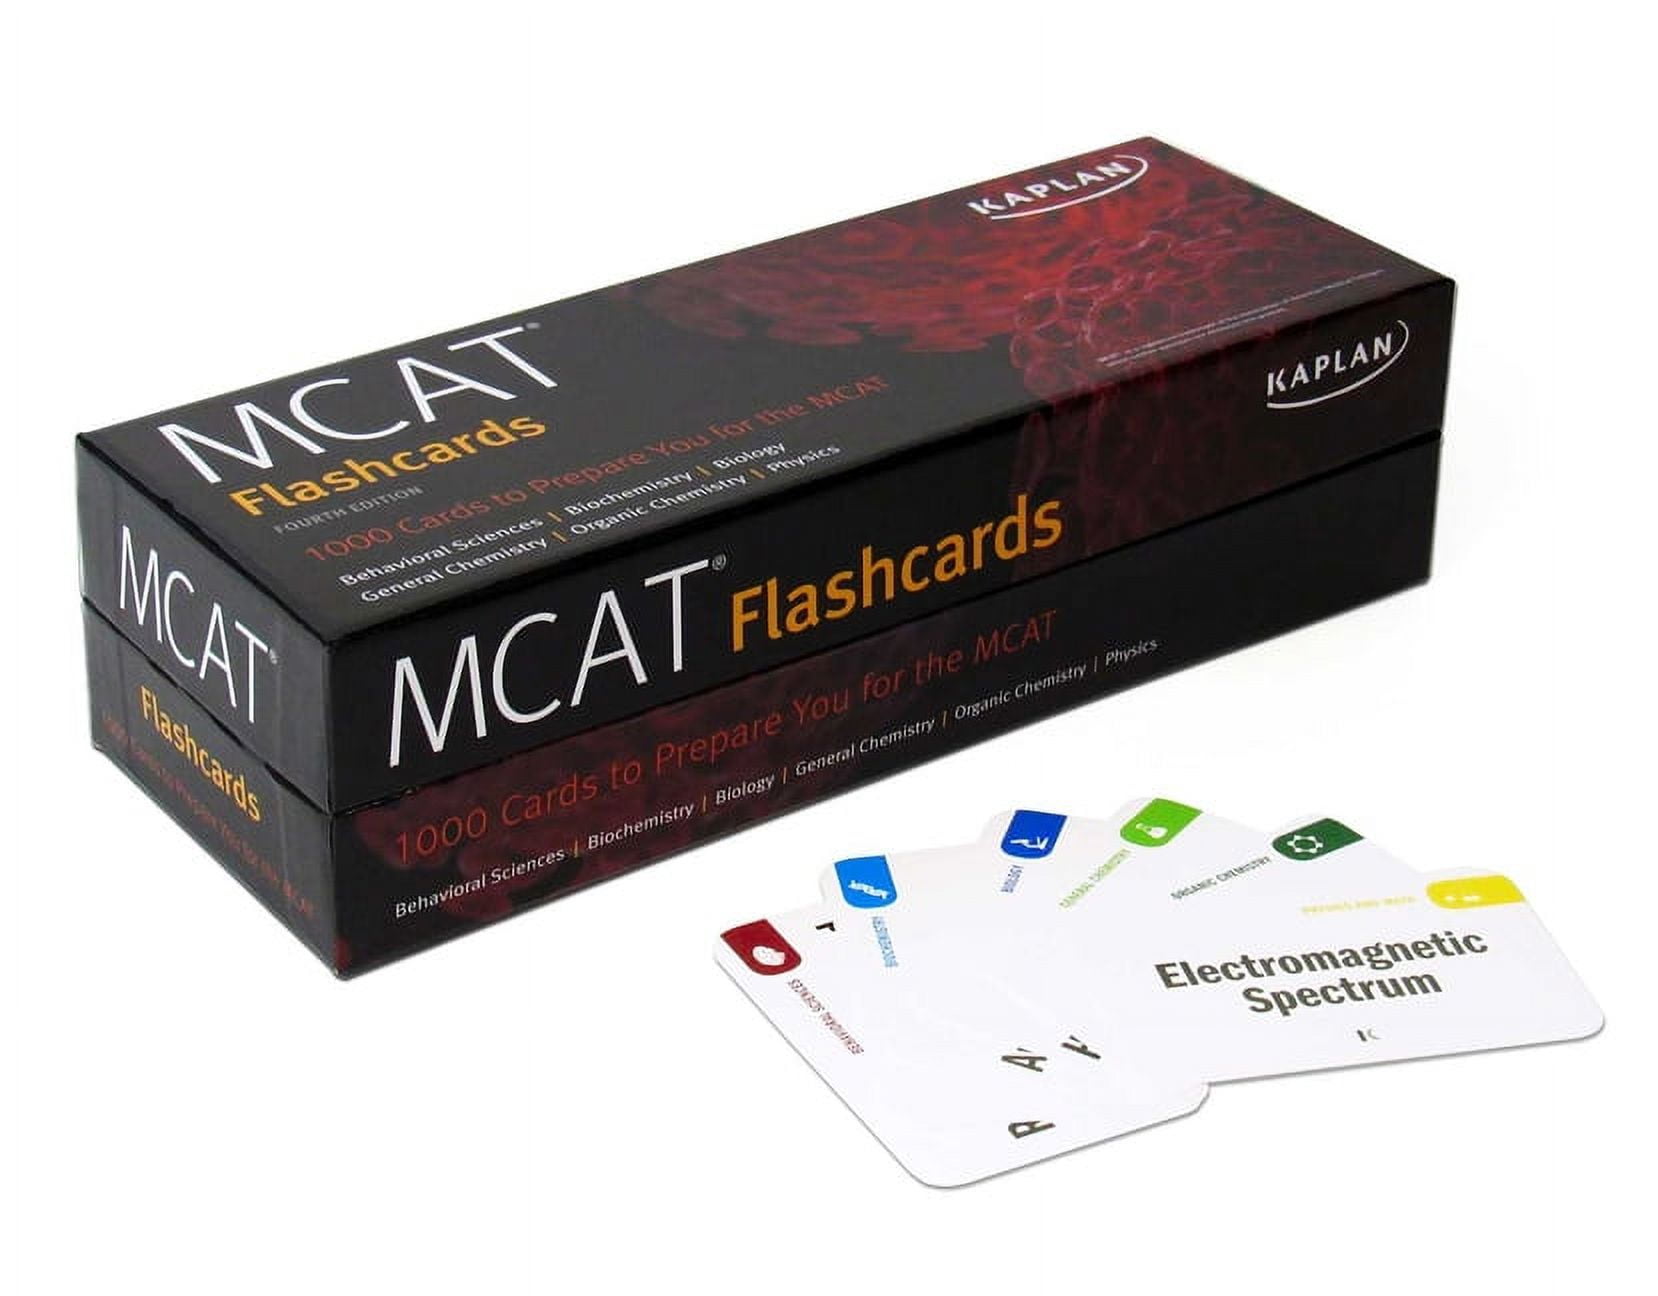 Kaplan Test Prep: MCAT Flashcards : 1000 Cards to Prepare You for